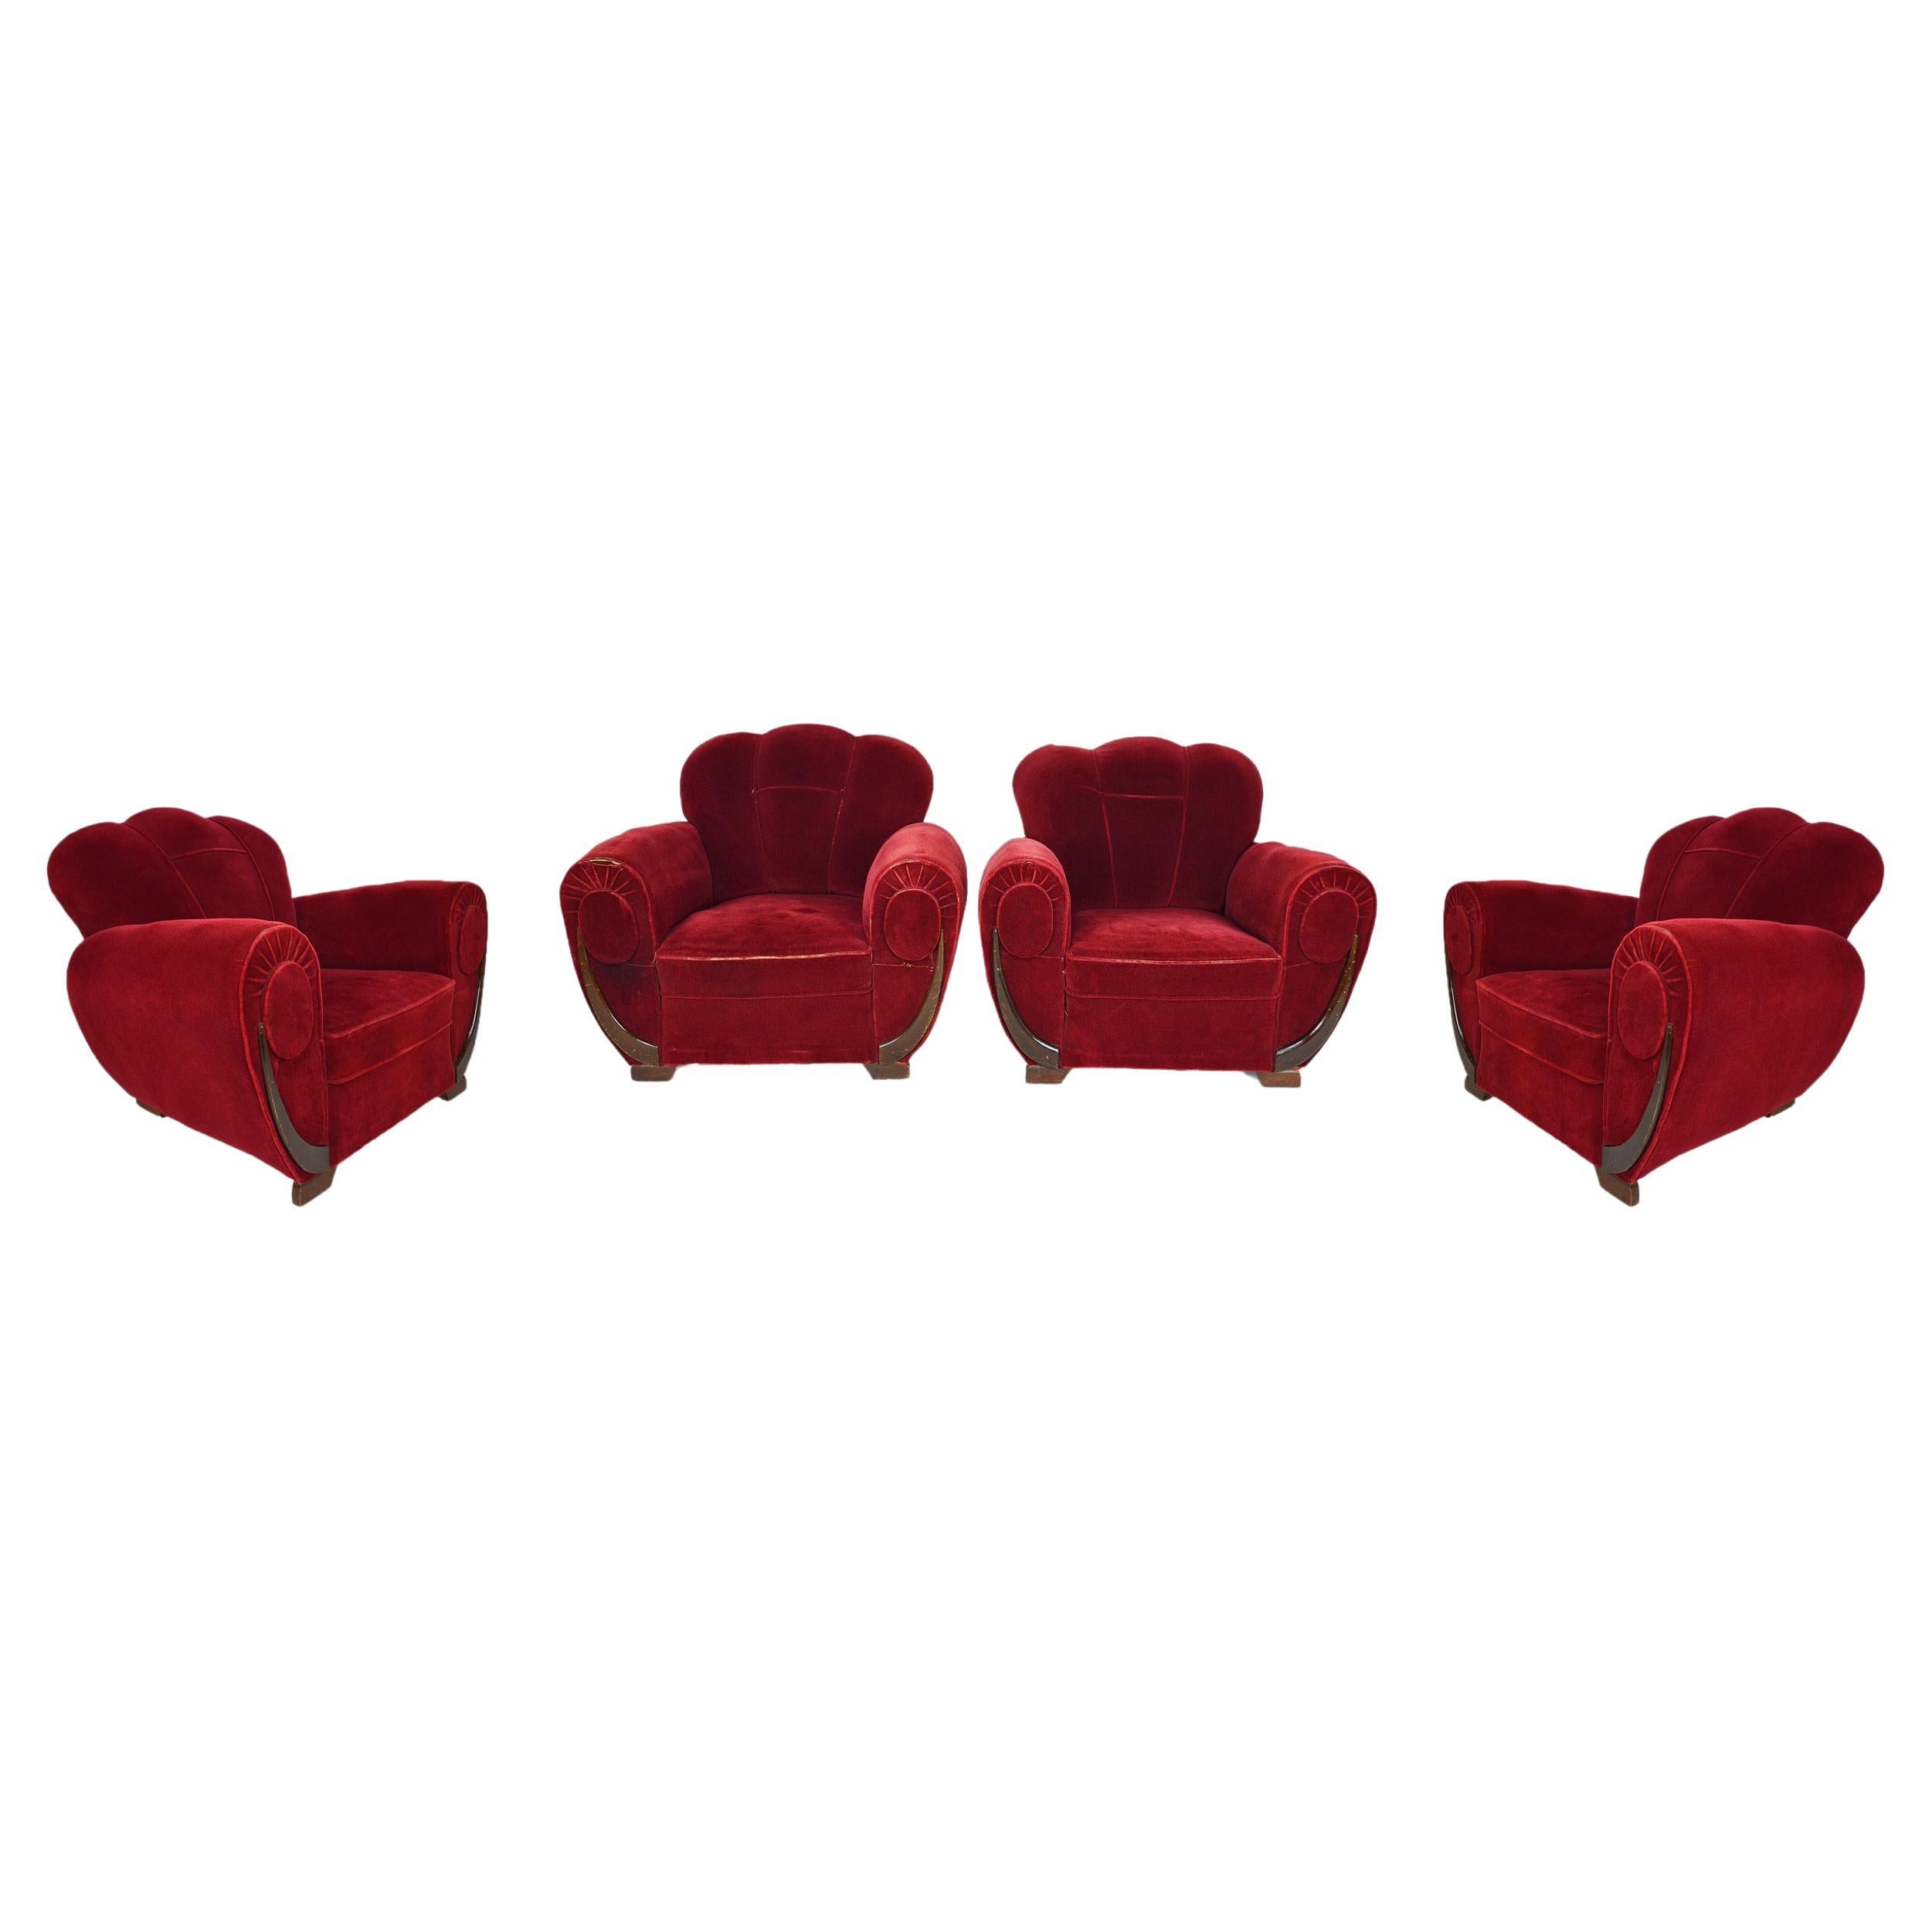 Set of 4 Art Deco Club Chairs in Red Velvet, France, circa 1930